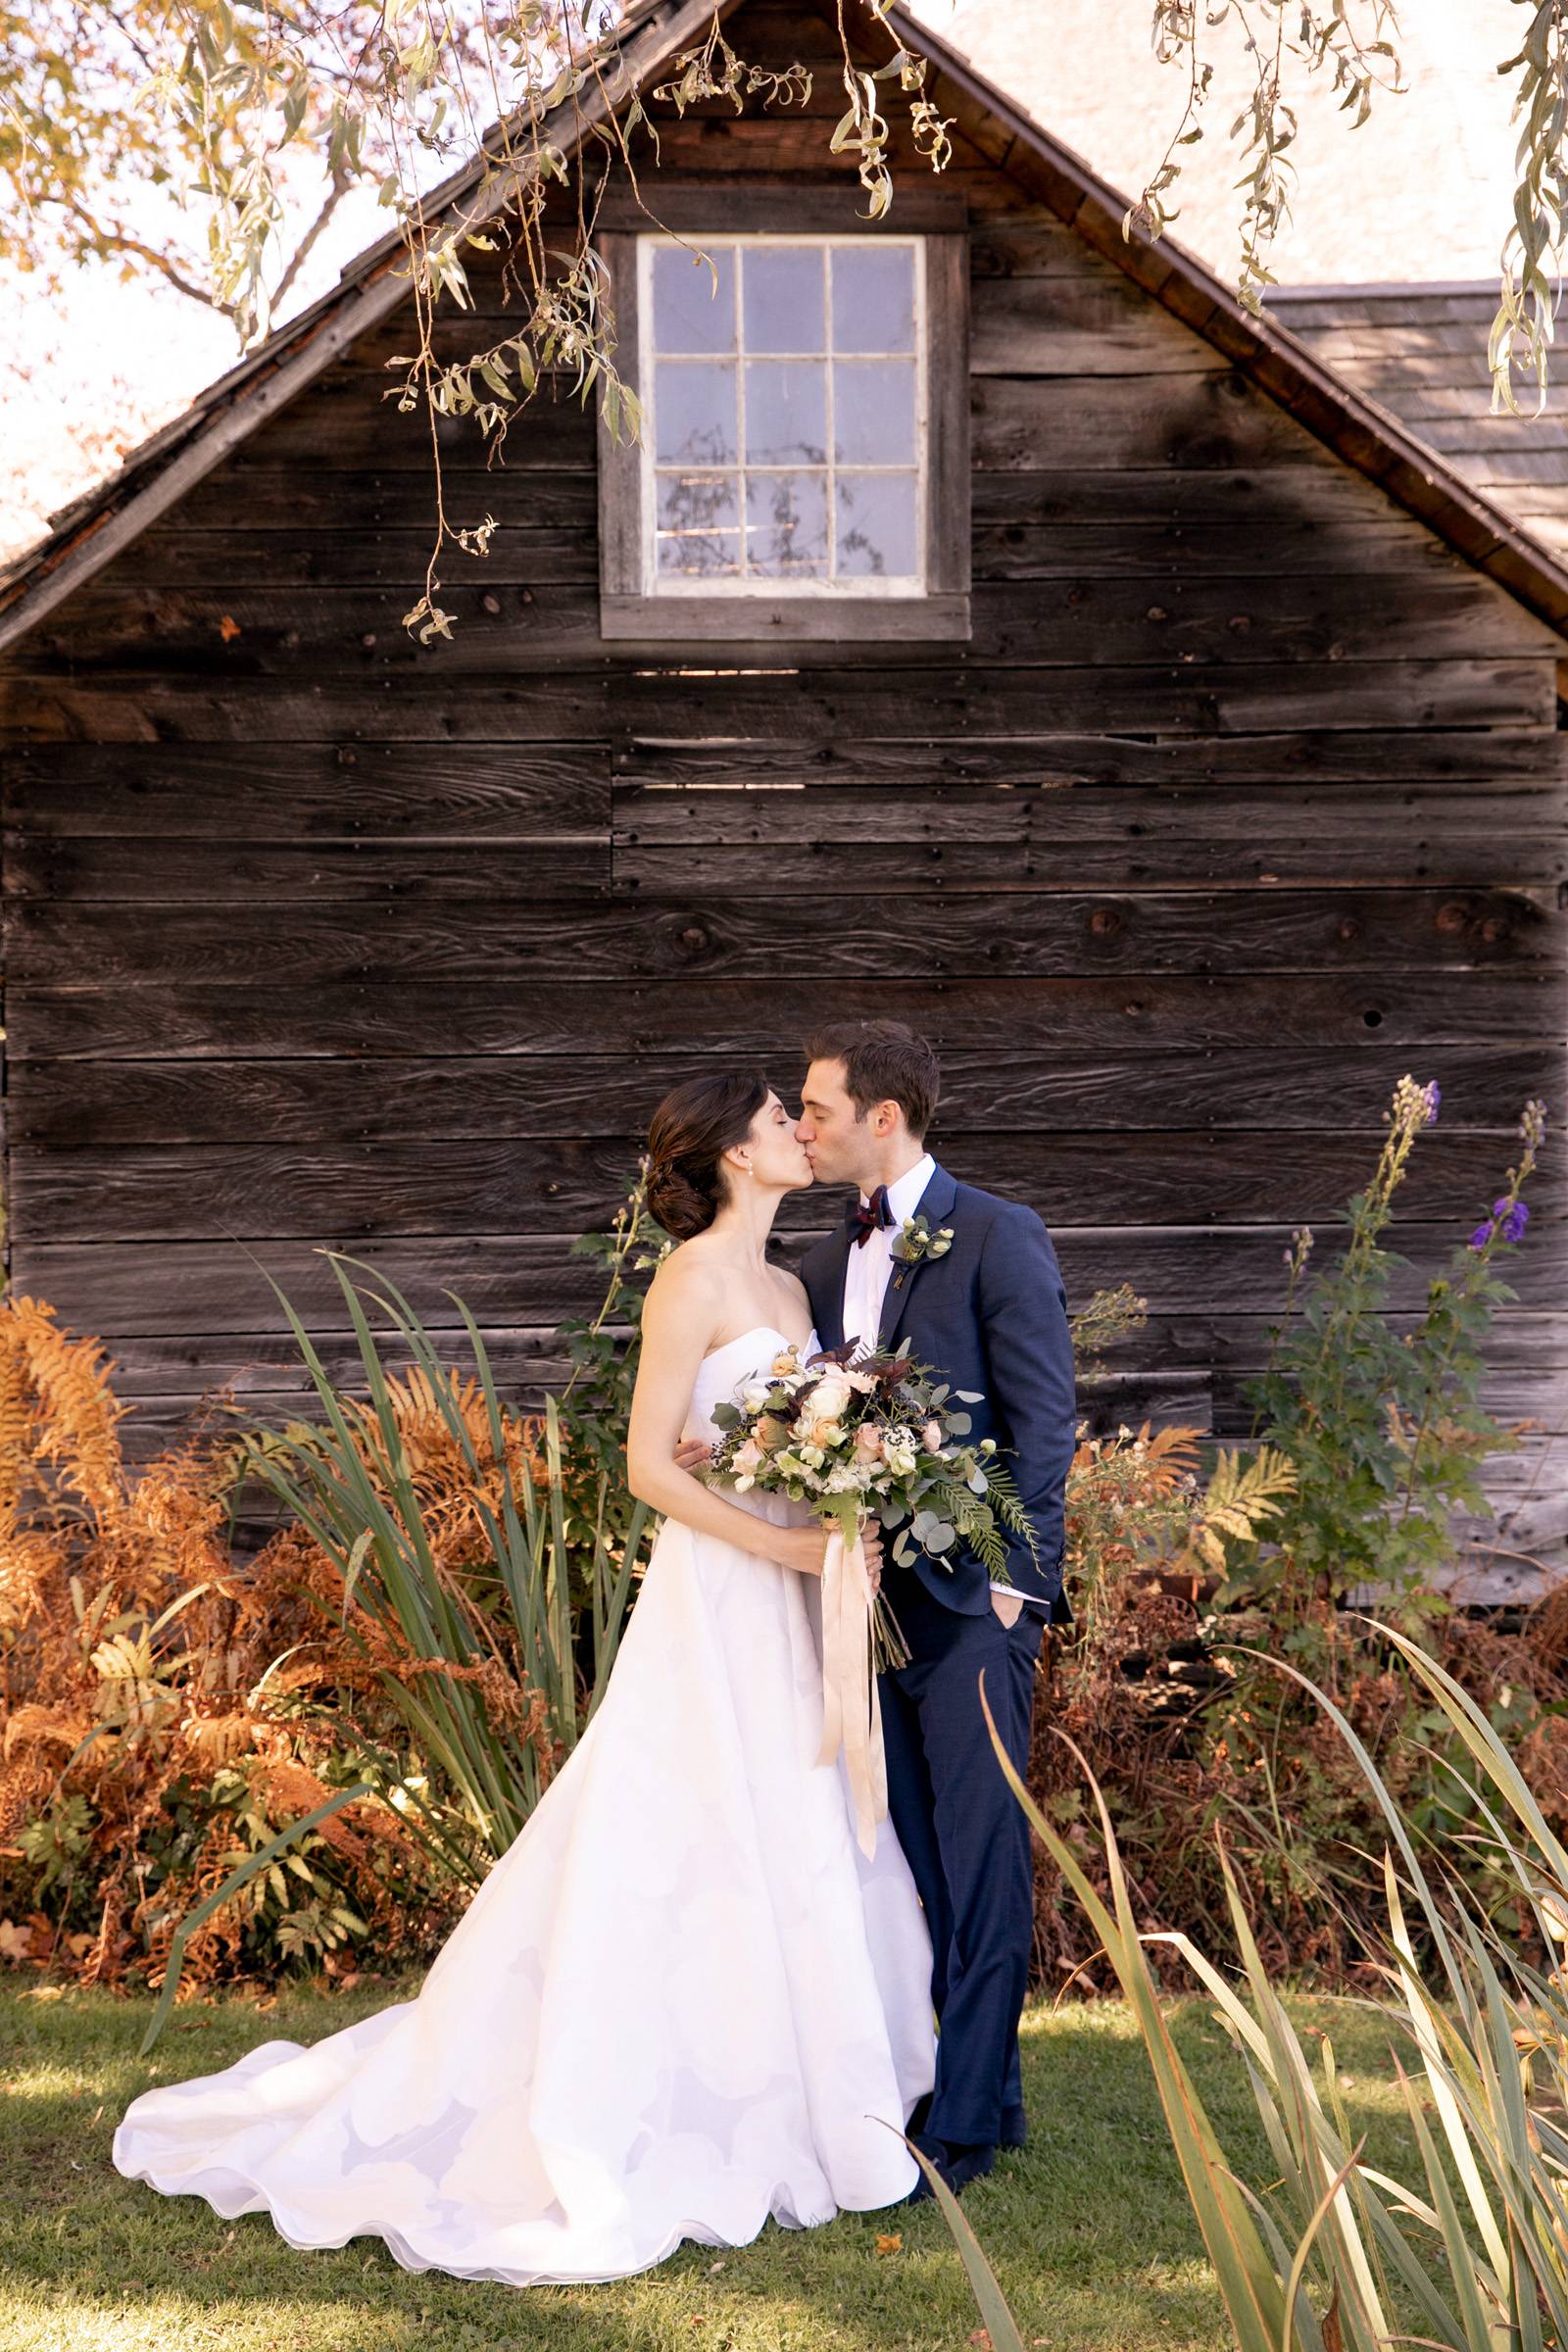 Classic bride and groom kissing portrait in front of rustic barn on Vermont wedding day at the Inn a